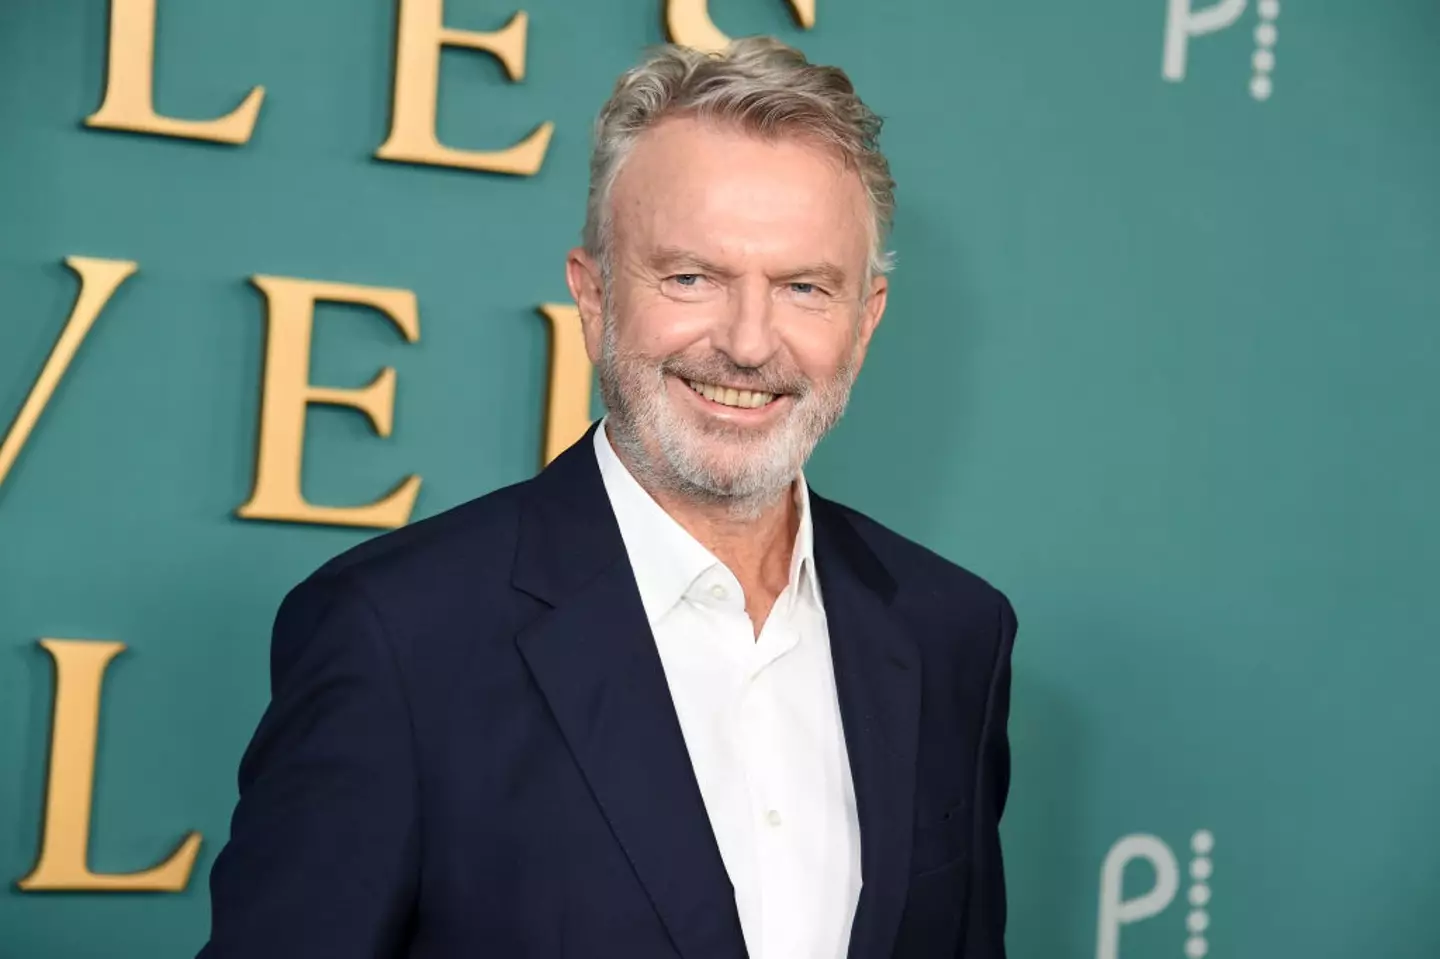 Sam Neill was diagnosed with angioimmunoblastic T-cell lymphoma in March 2022. (Gregg DeGuire/Variety via Getty Images)